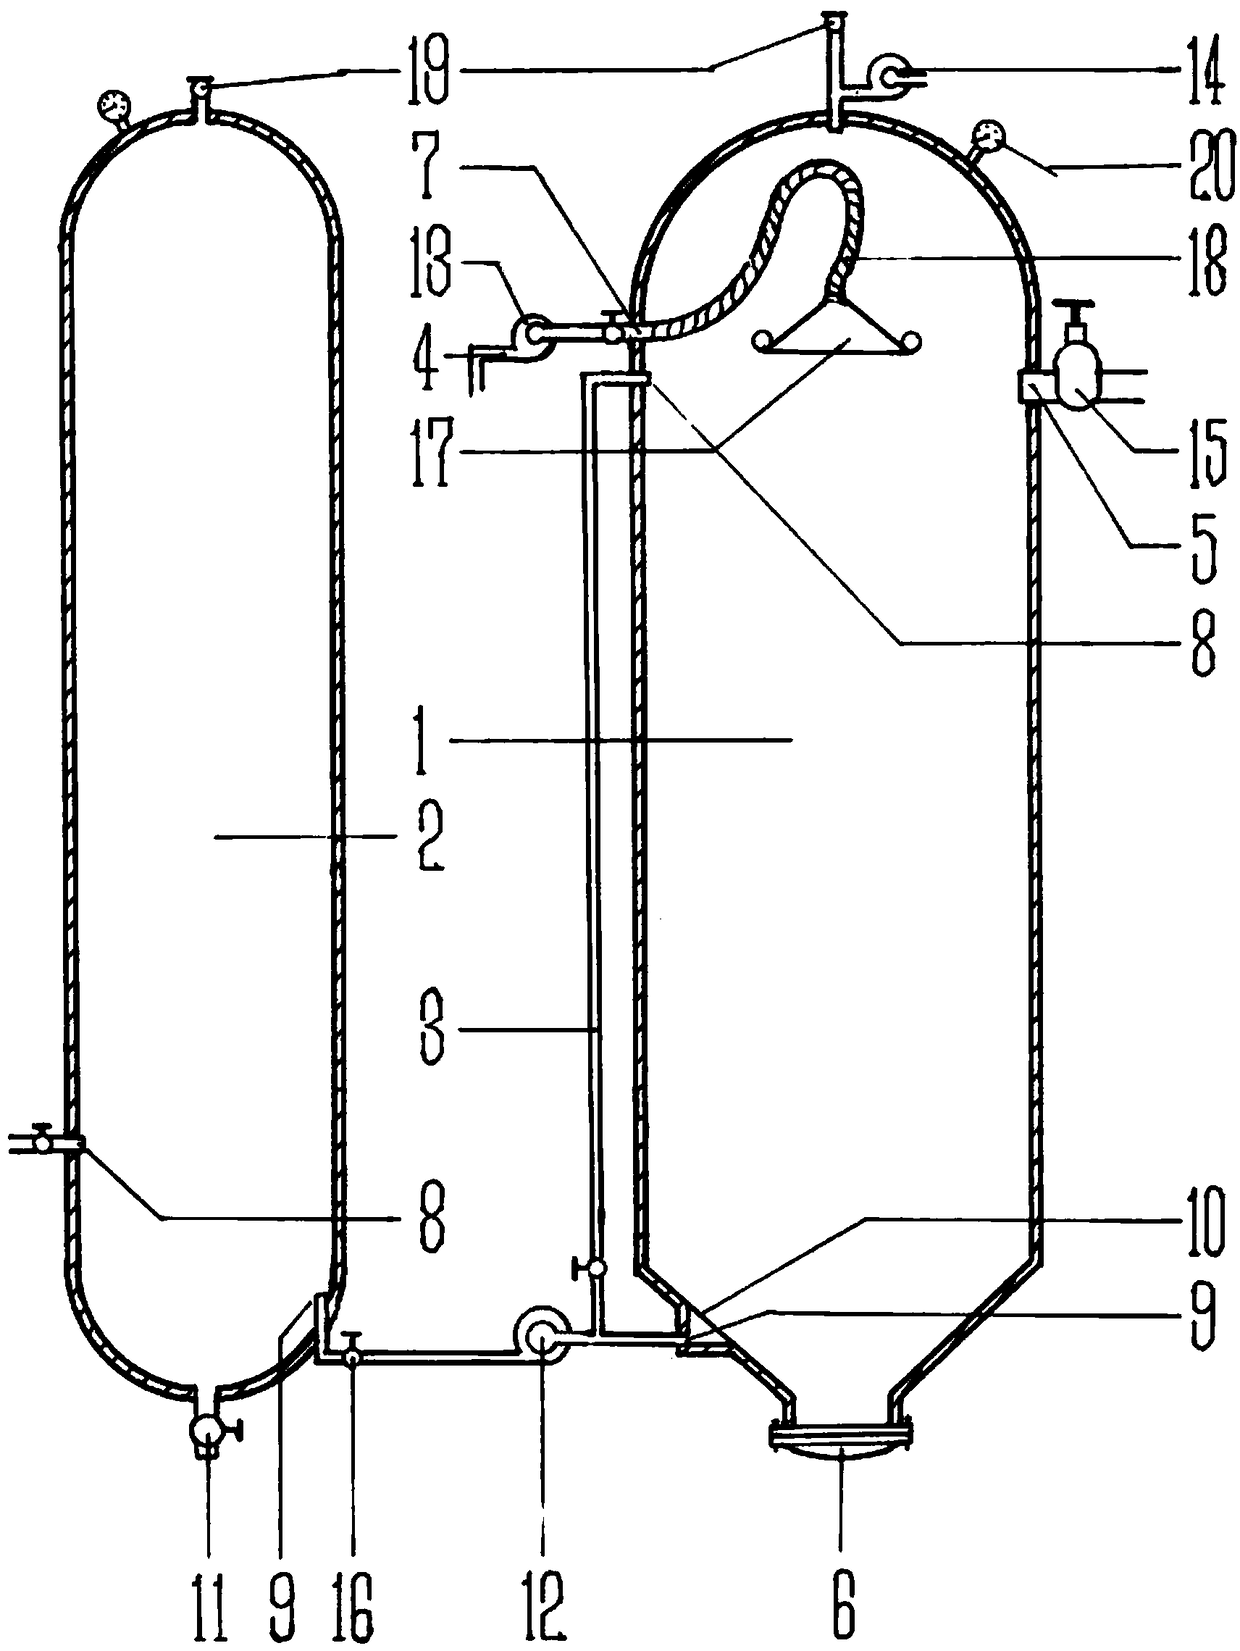 Device for separating oil-containing silt by liquid-state CO2